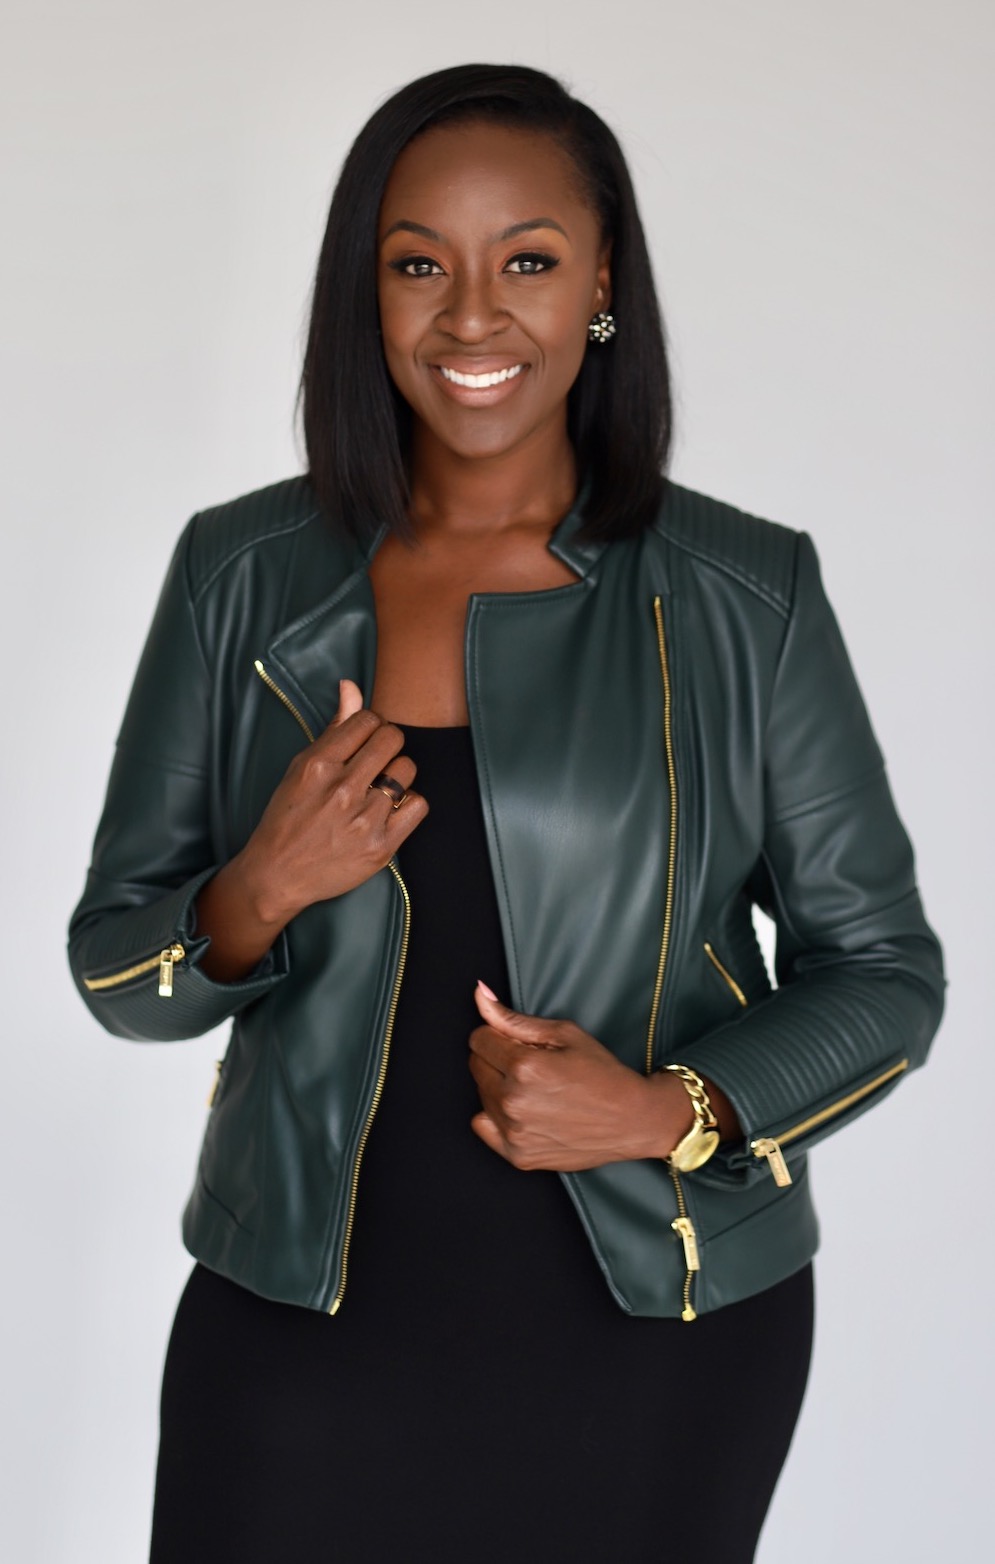 Confident woman in a black dress and green leather jacket smiling at the camera.